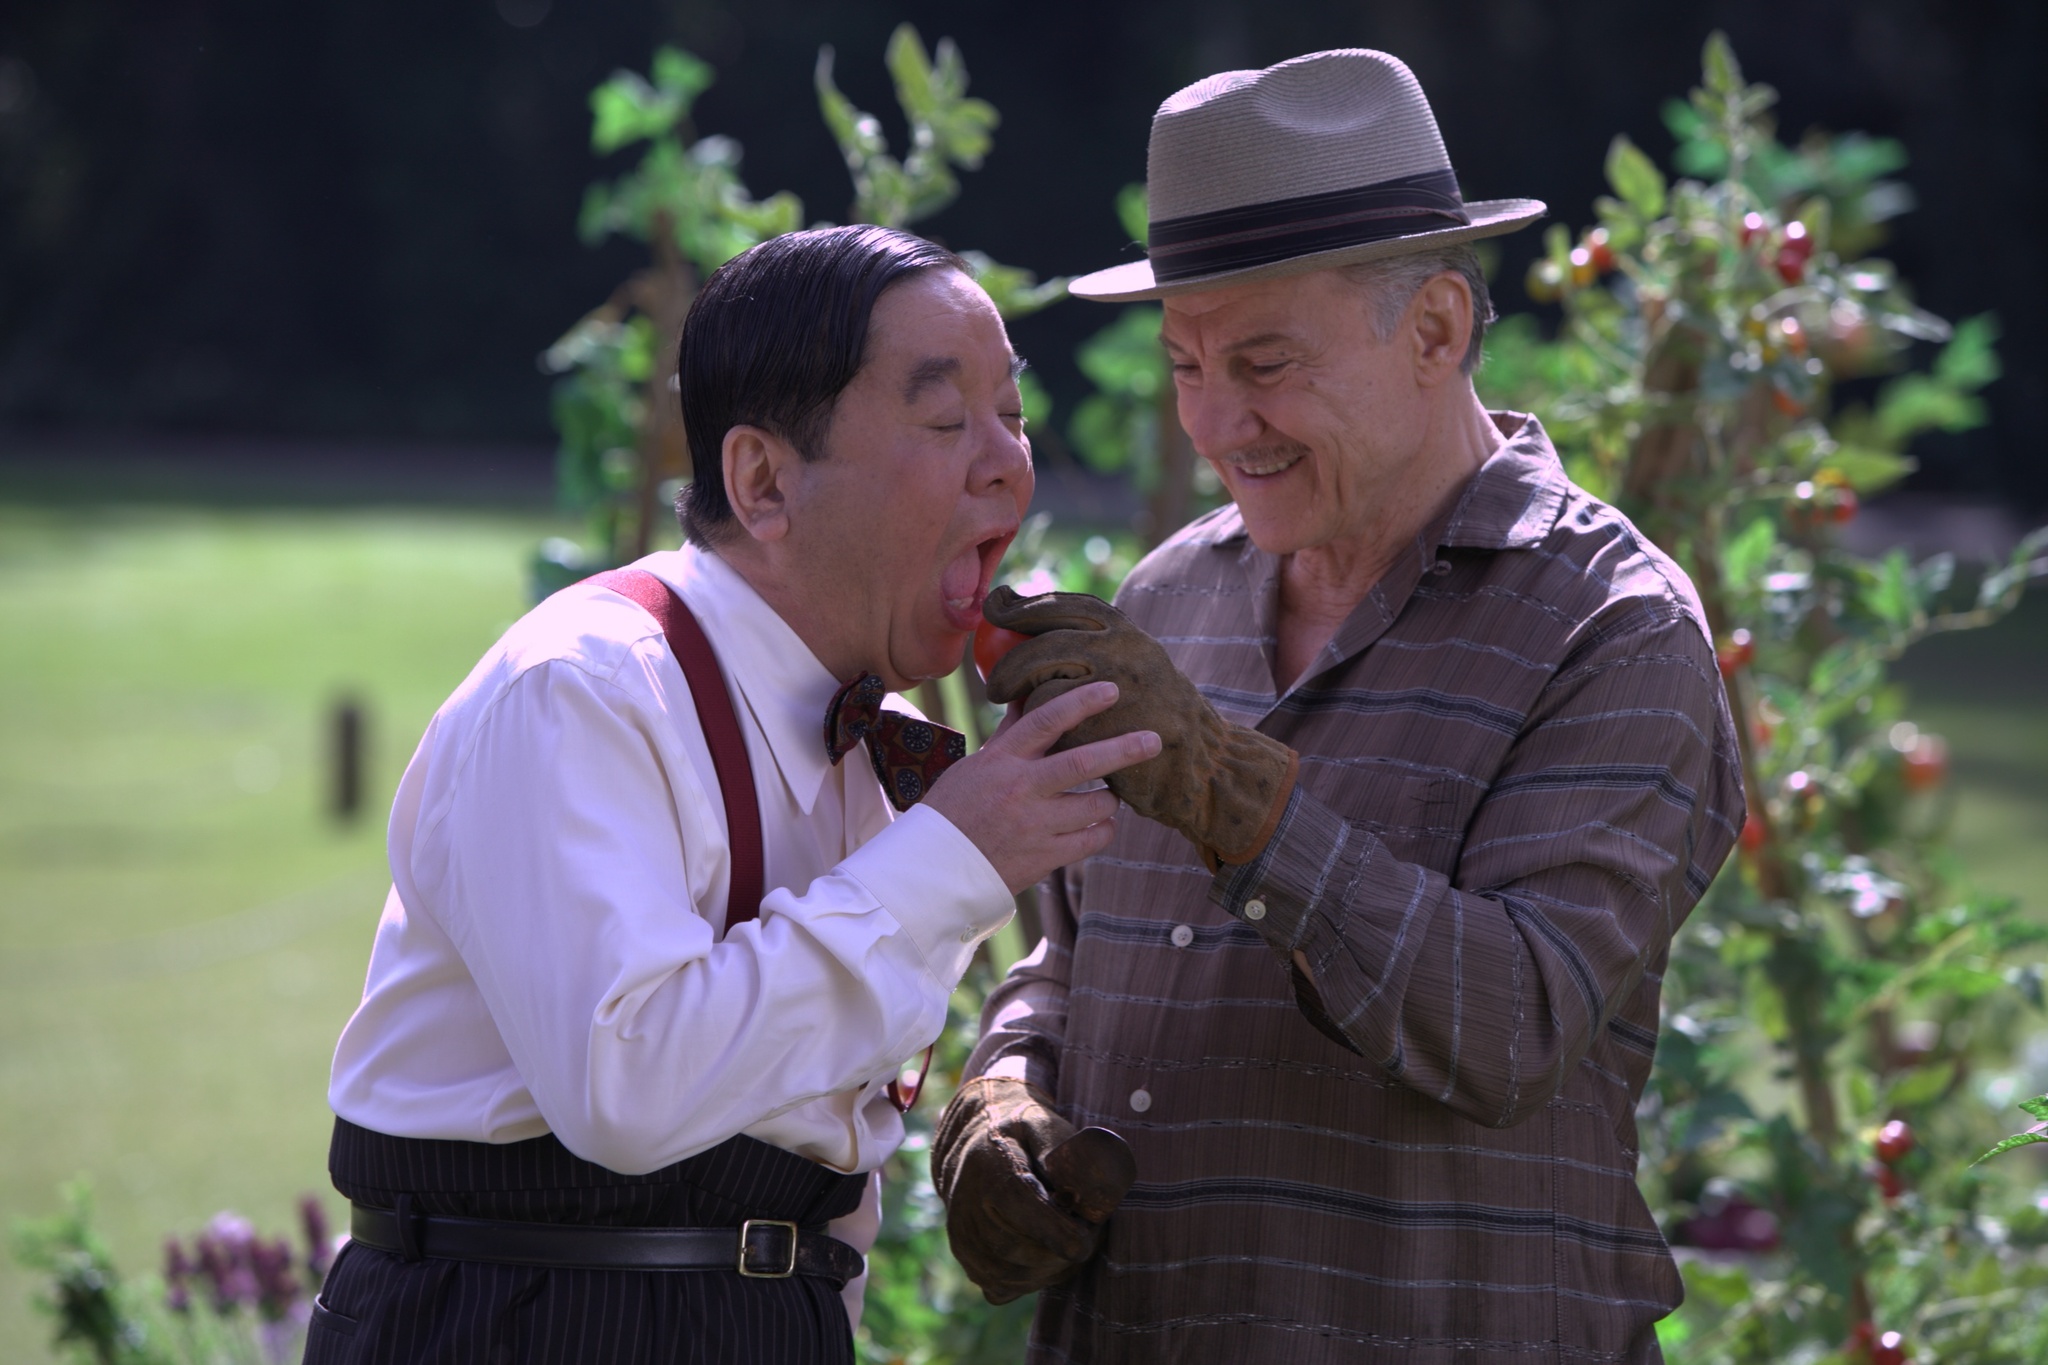 Still of Harvey Keitel and Hyung-rae Shim in The Last Godfather (2010)